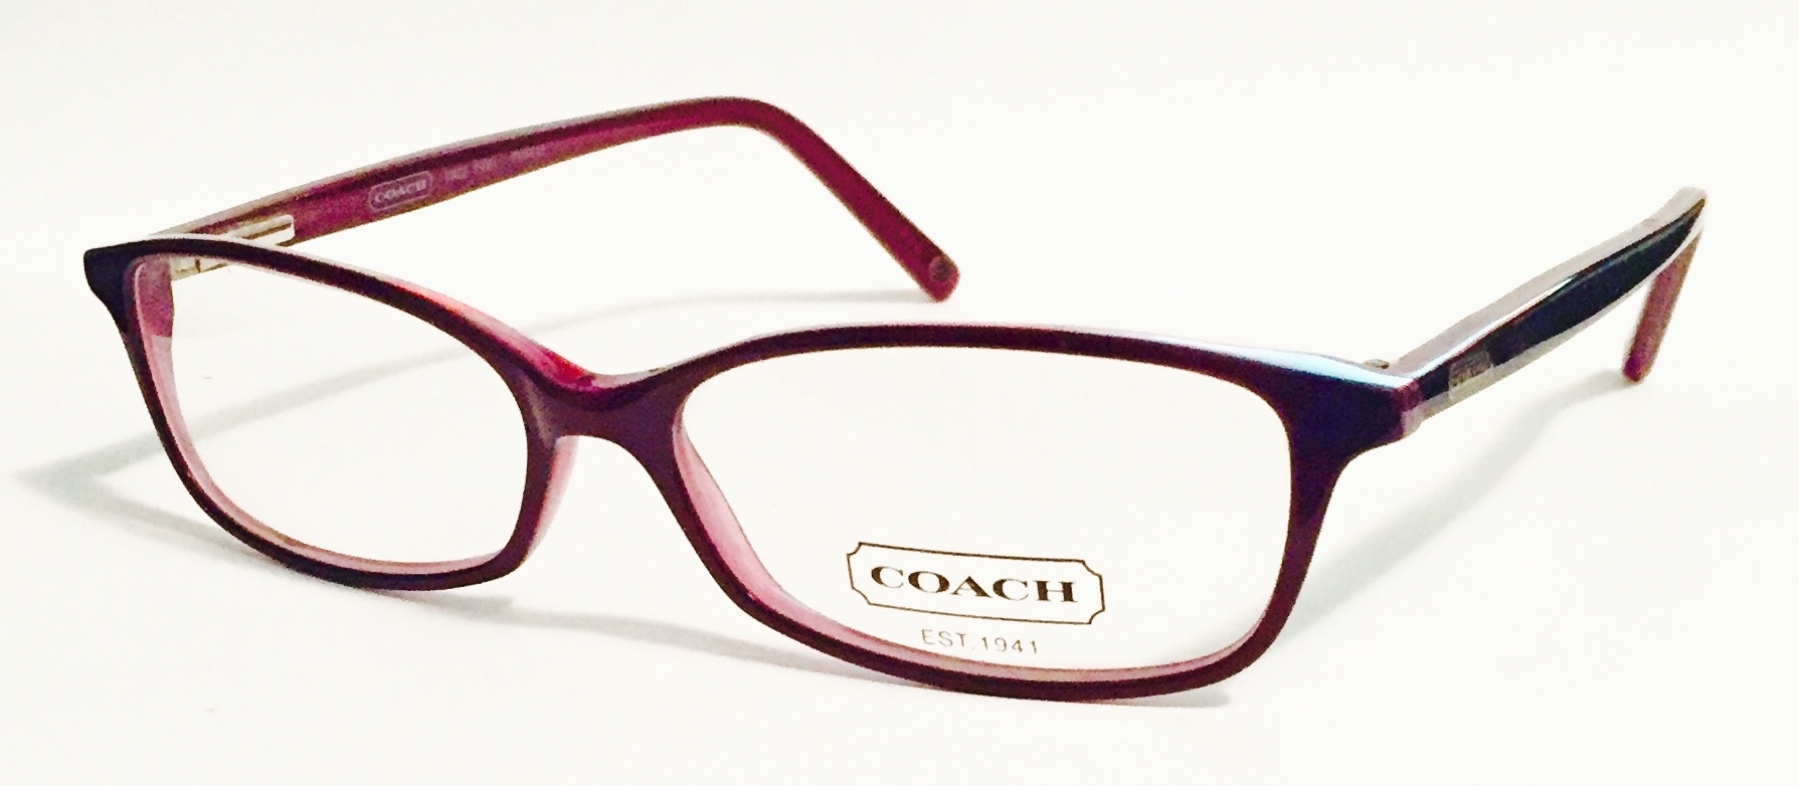 COACH PAGE 506 513